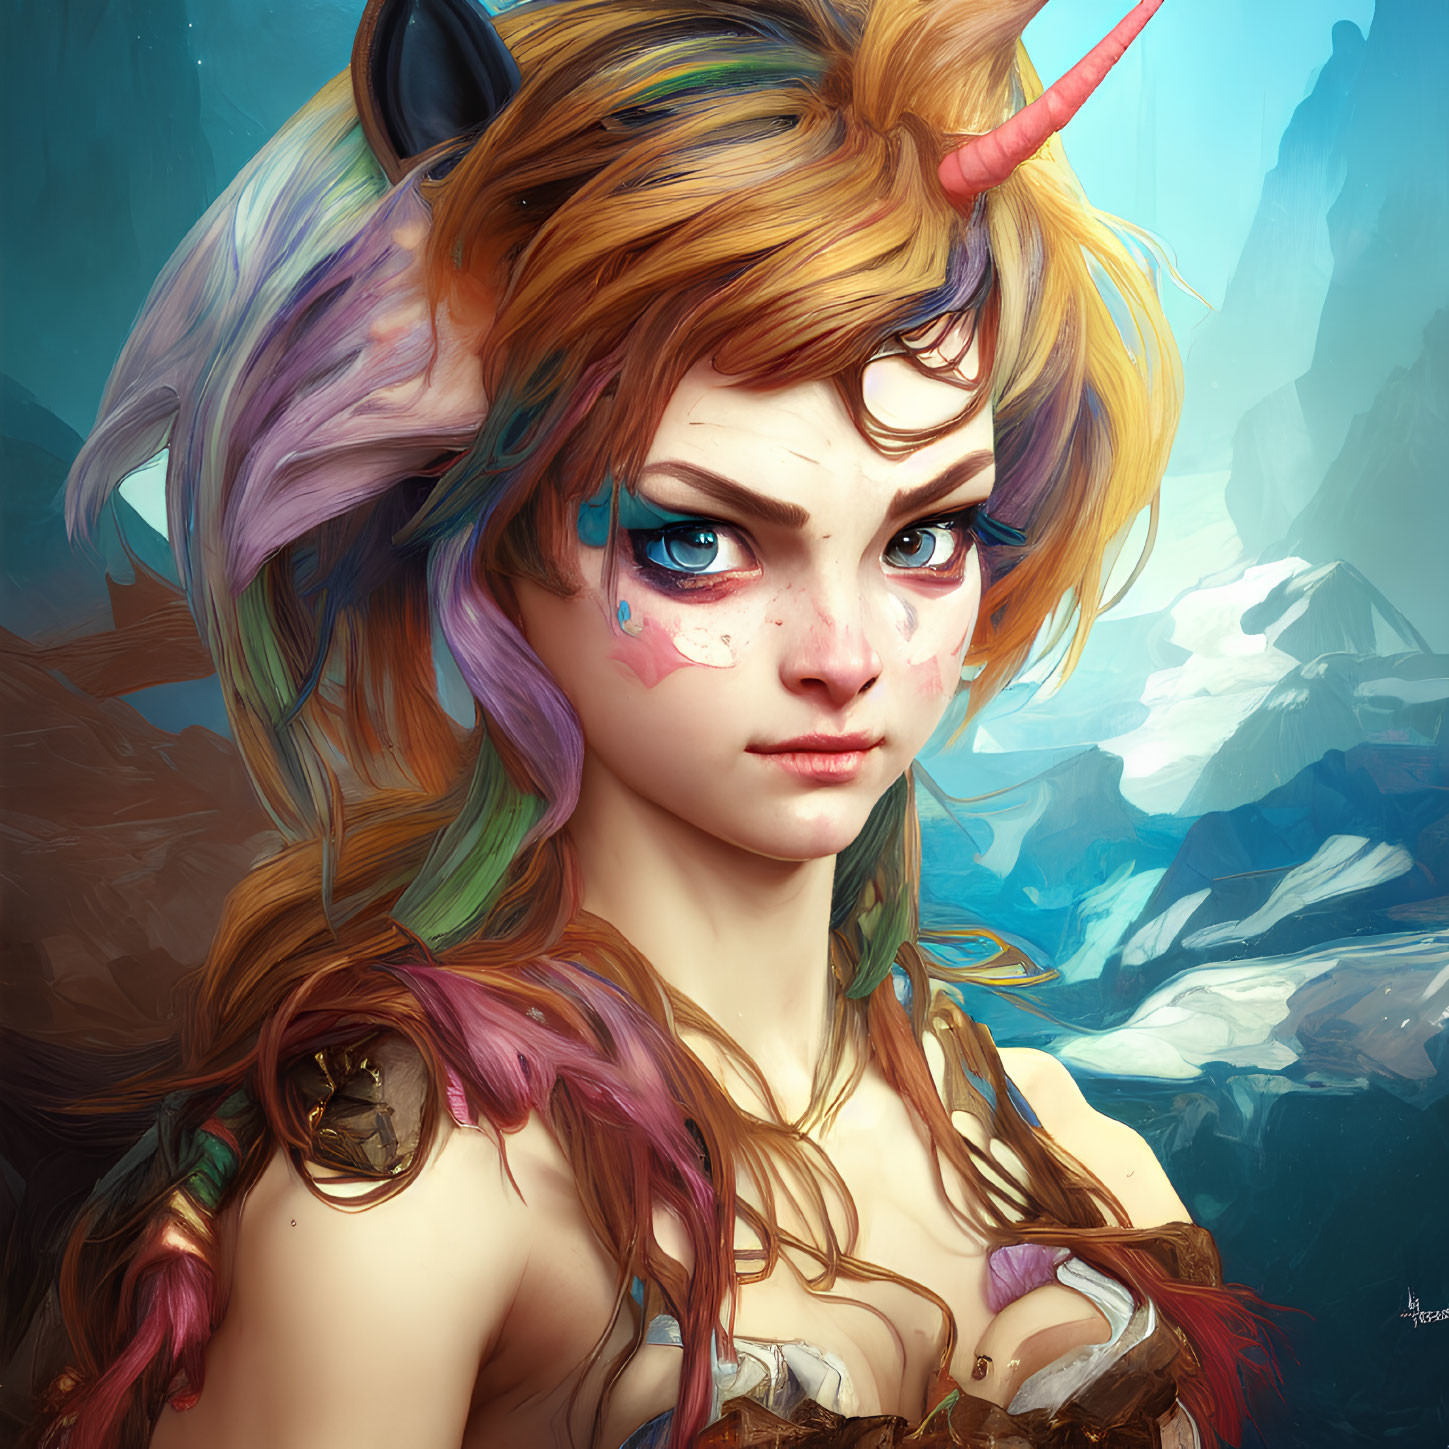 Colorful mythical female creature with horn and multicolored hair